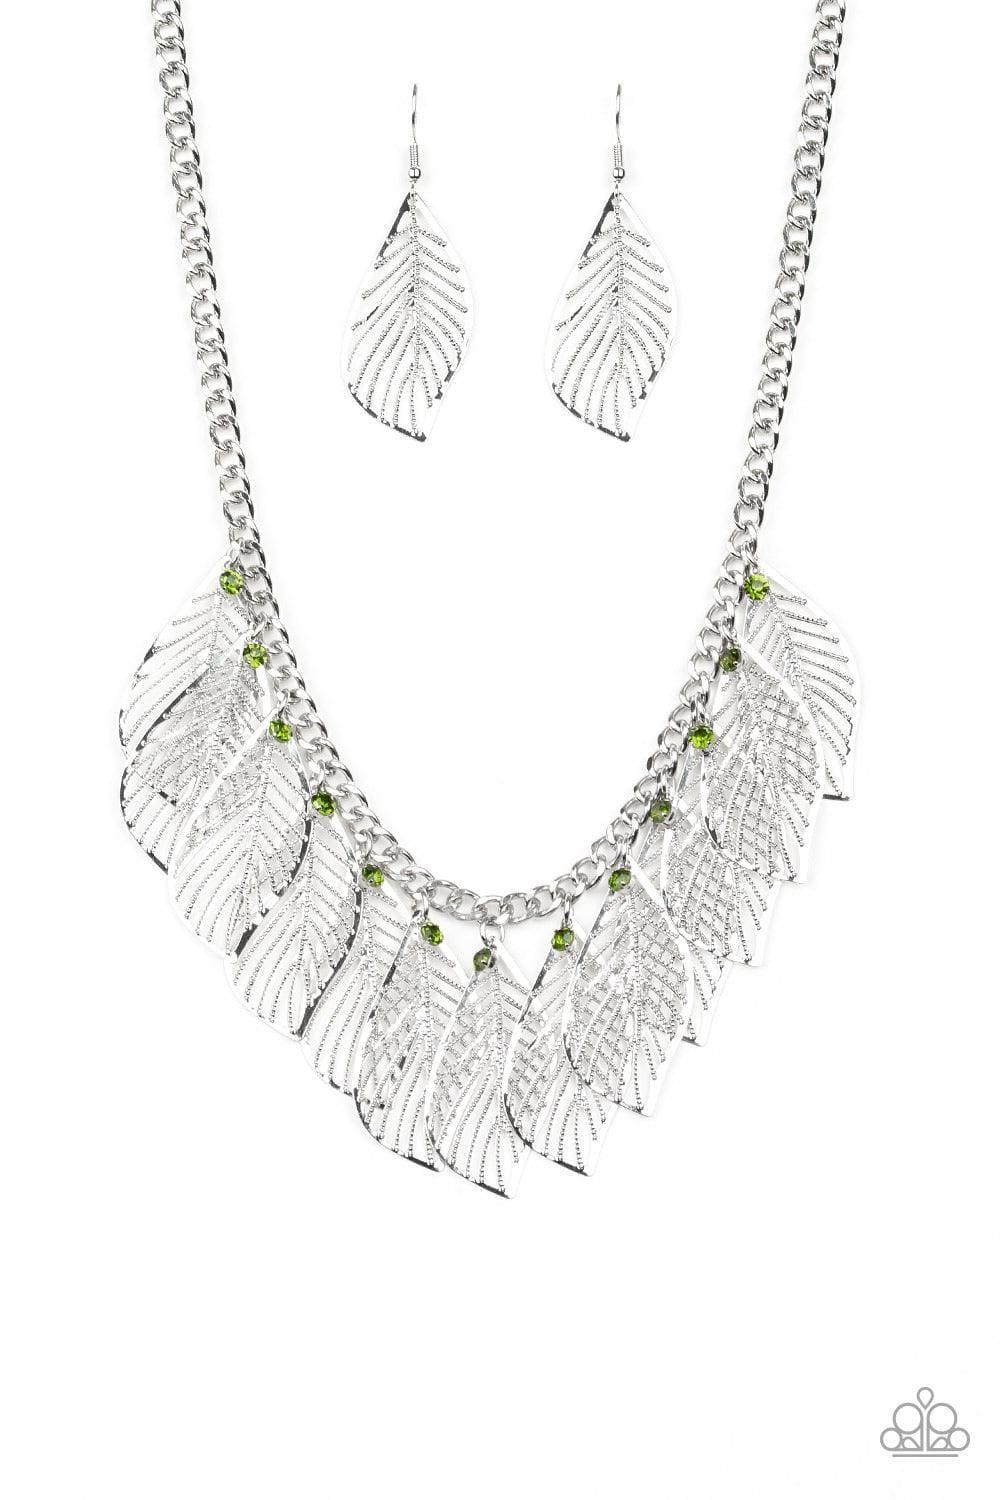 Paparazzi Accessories - Feathery Foliage - Green Necklace - Bling by JessieK